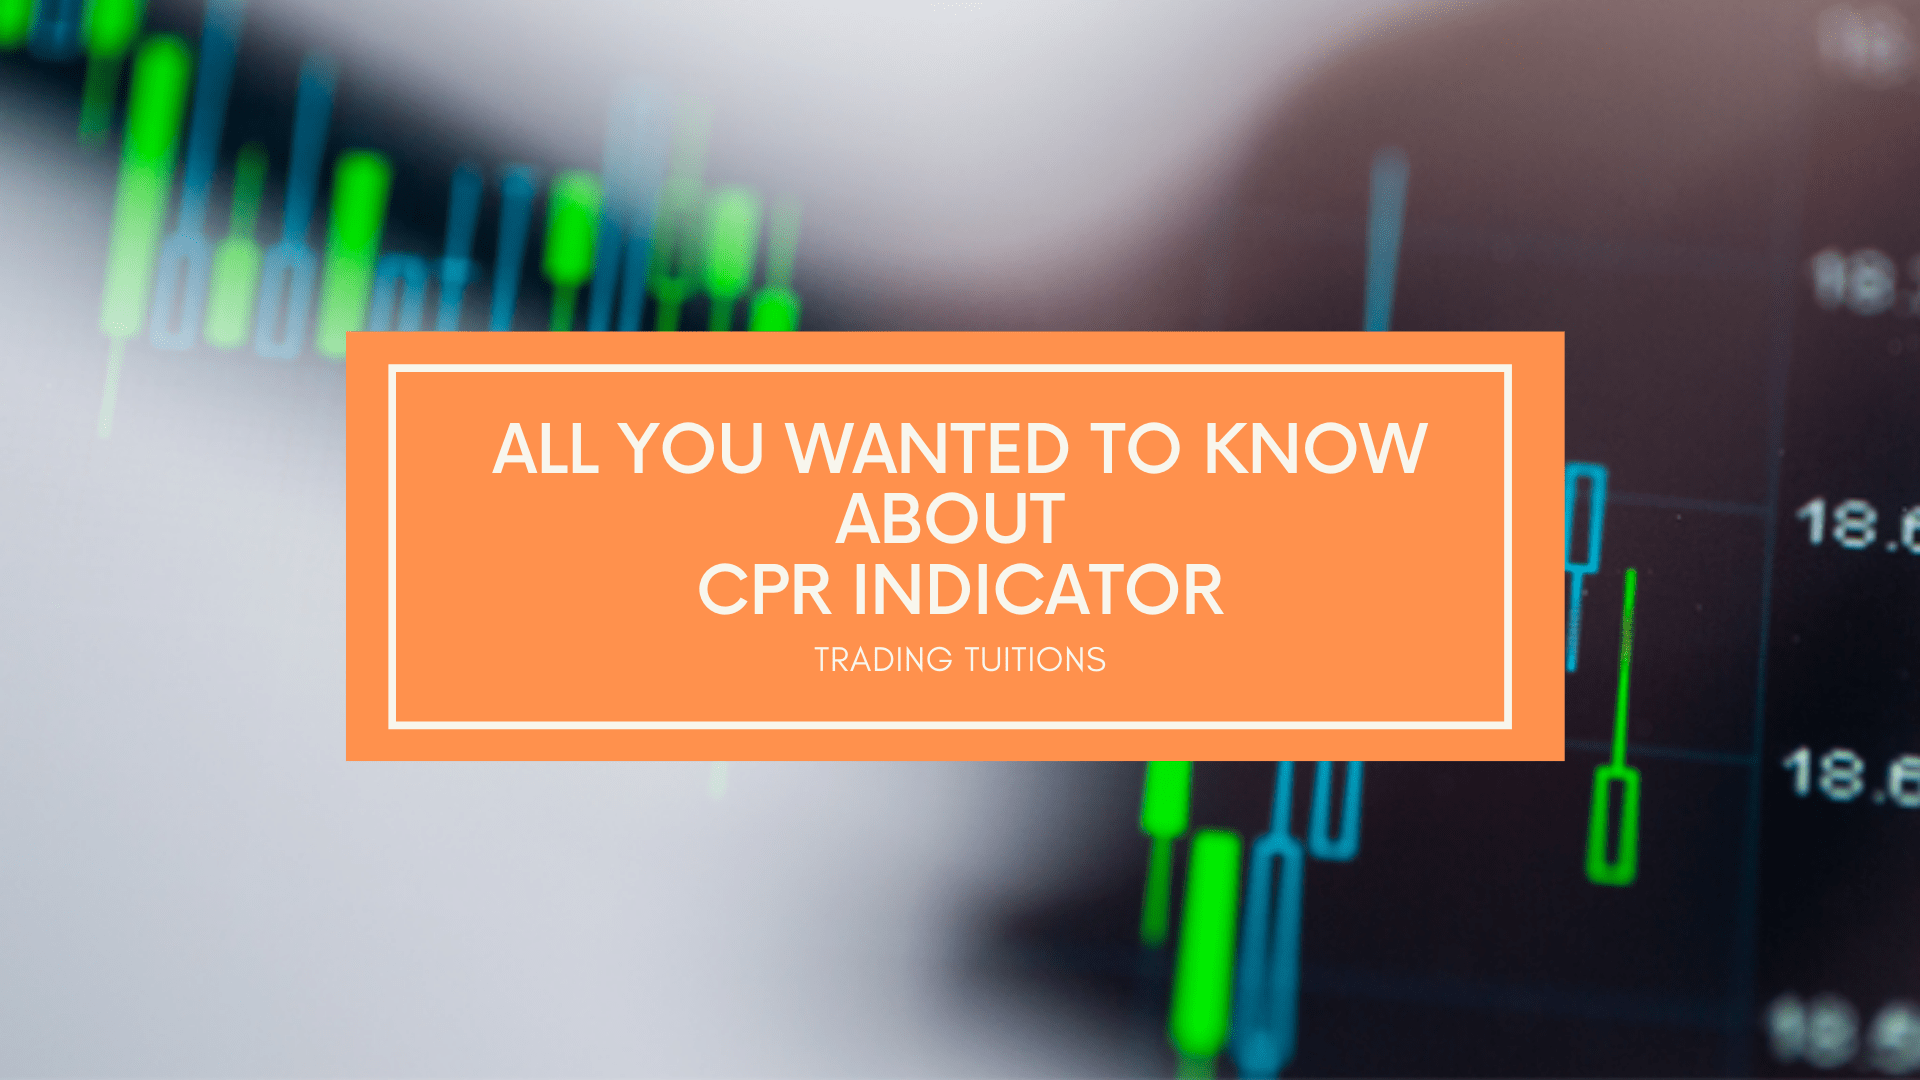 All you wanted to know about Central Pivot Range (CPR) Indicator